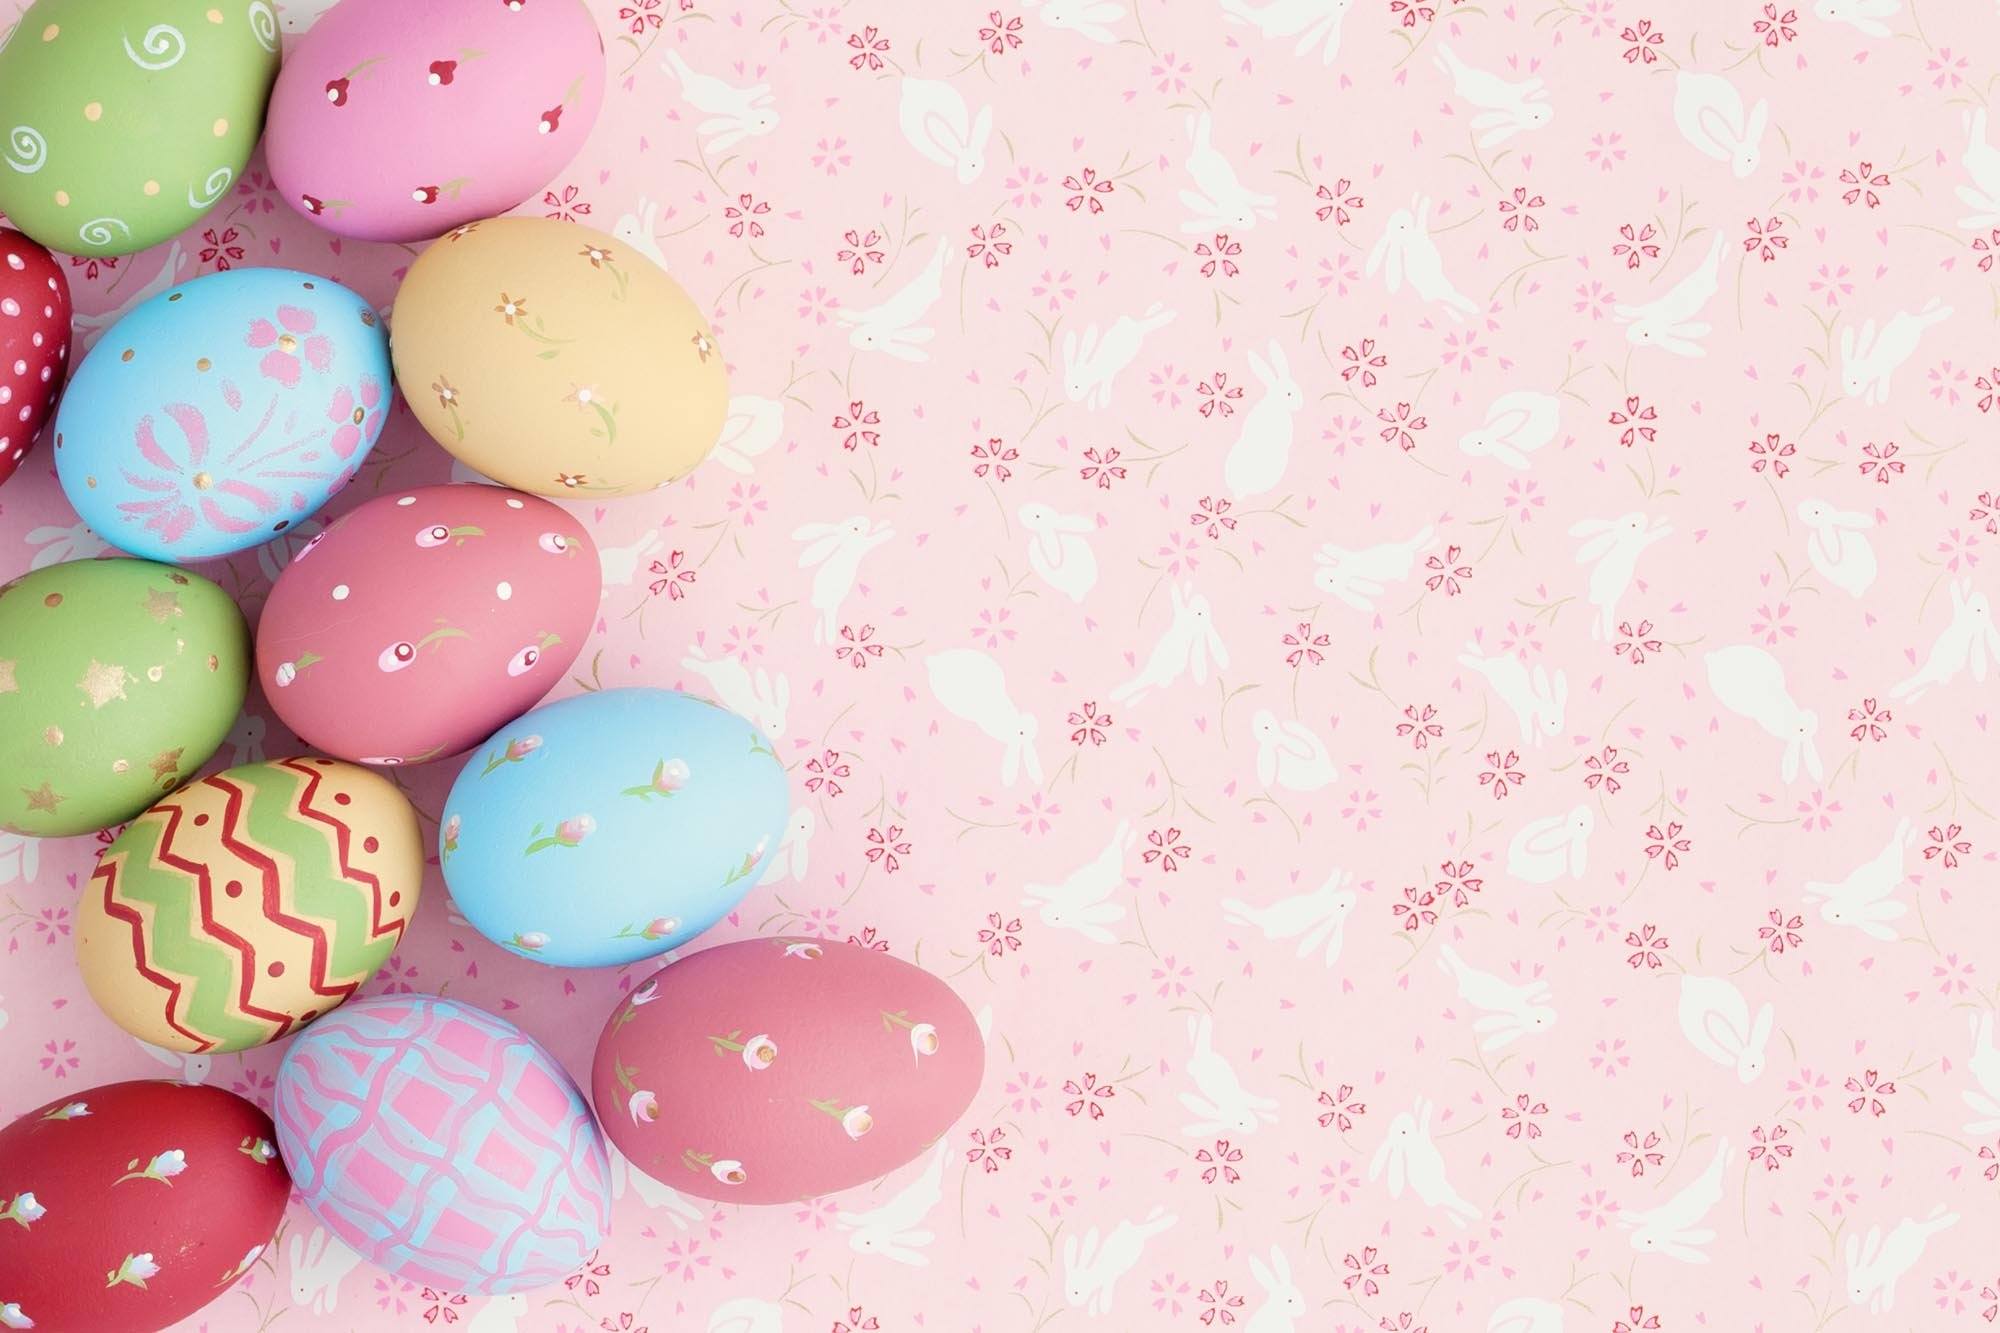 Colorful Easter Eggs On Pink Paper Backdrop For Photography Shopbackdrop